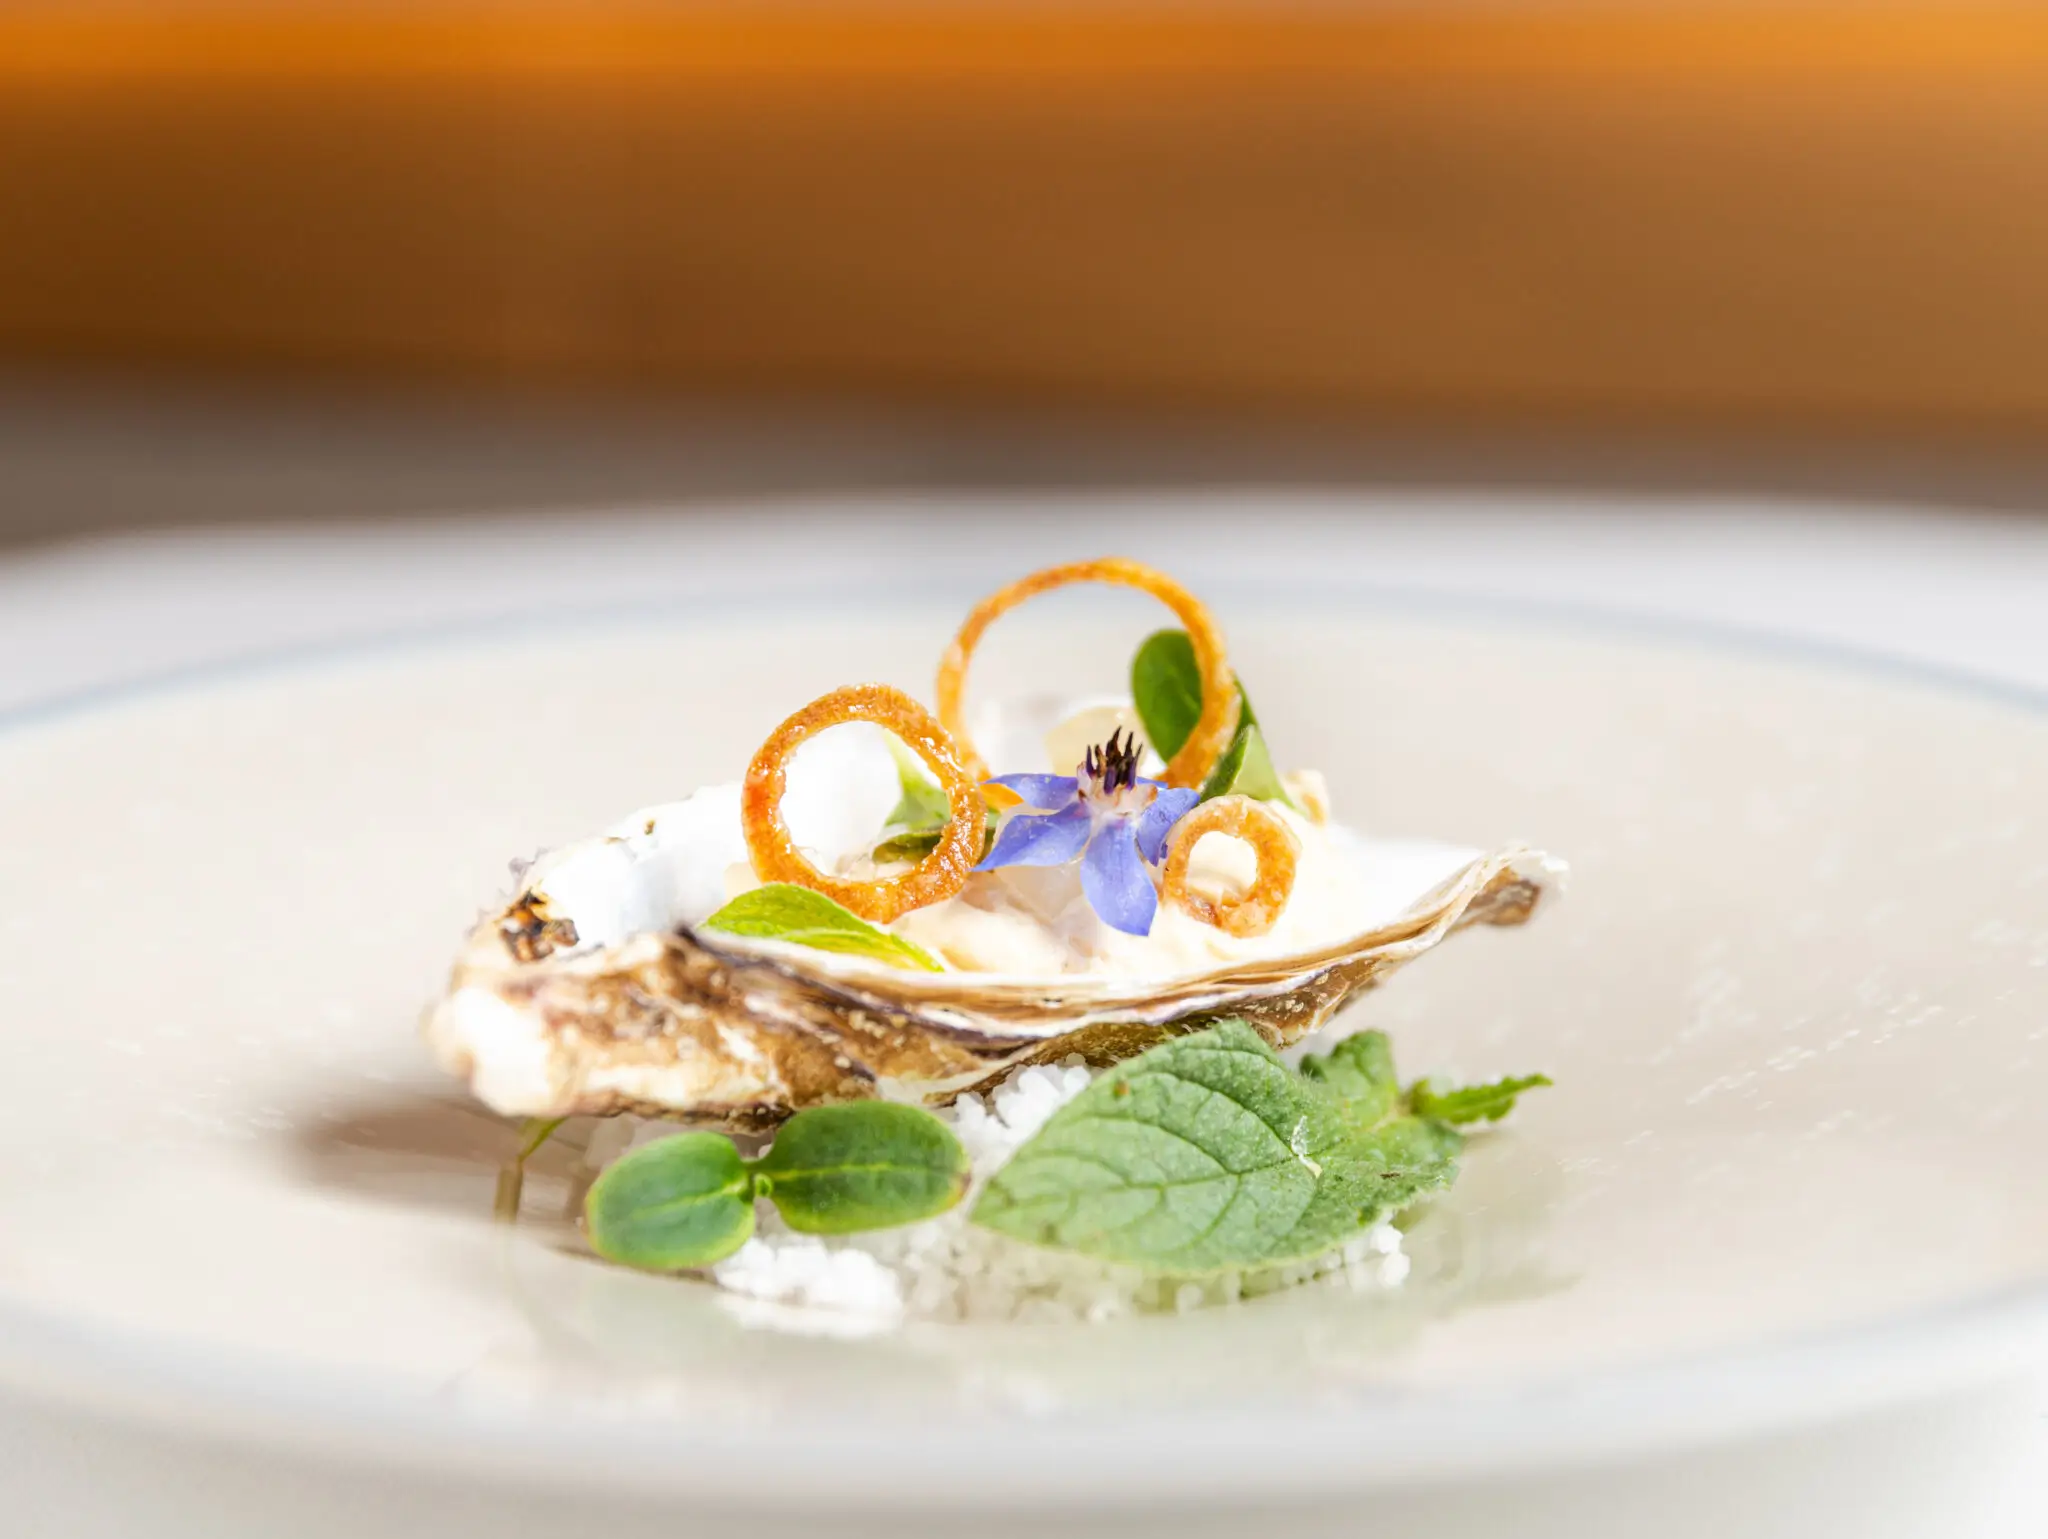 A freshly served Kermancy oyster at Restaurant Alliance in Paris, elegantly garnished with herbs, flowers, and a citrus twist, resting on a bed of ice – showcasing the affordable finesse of Michelin-starred cuisine."